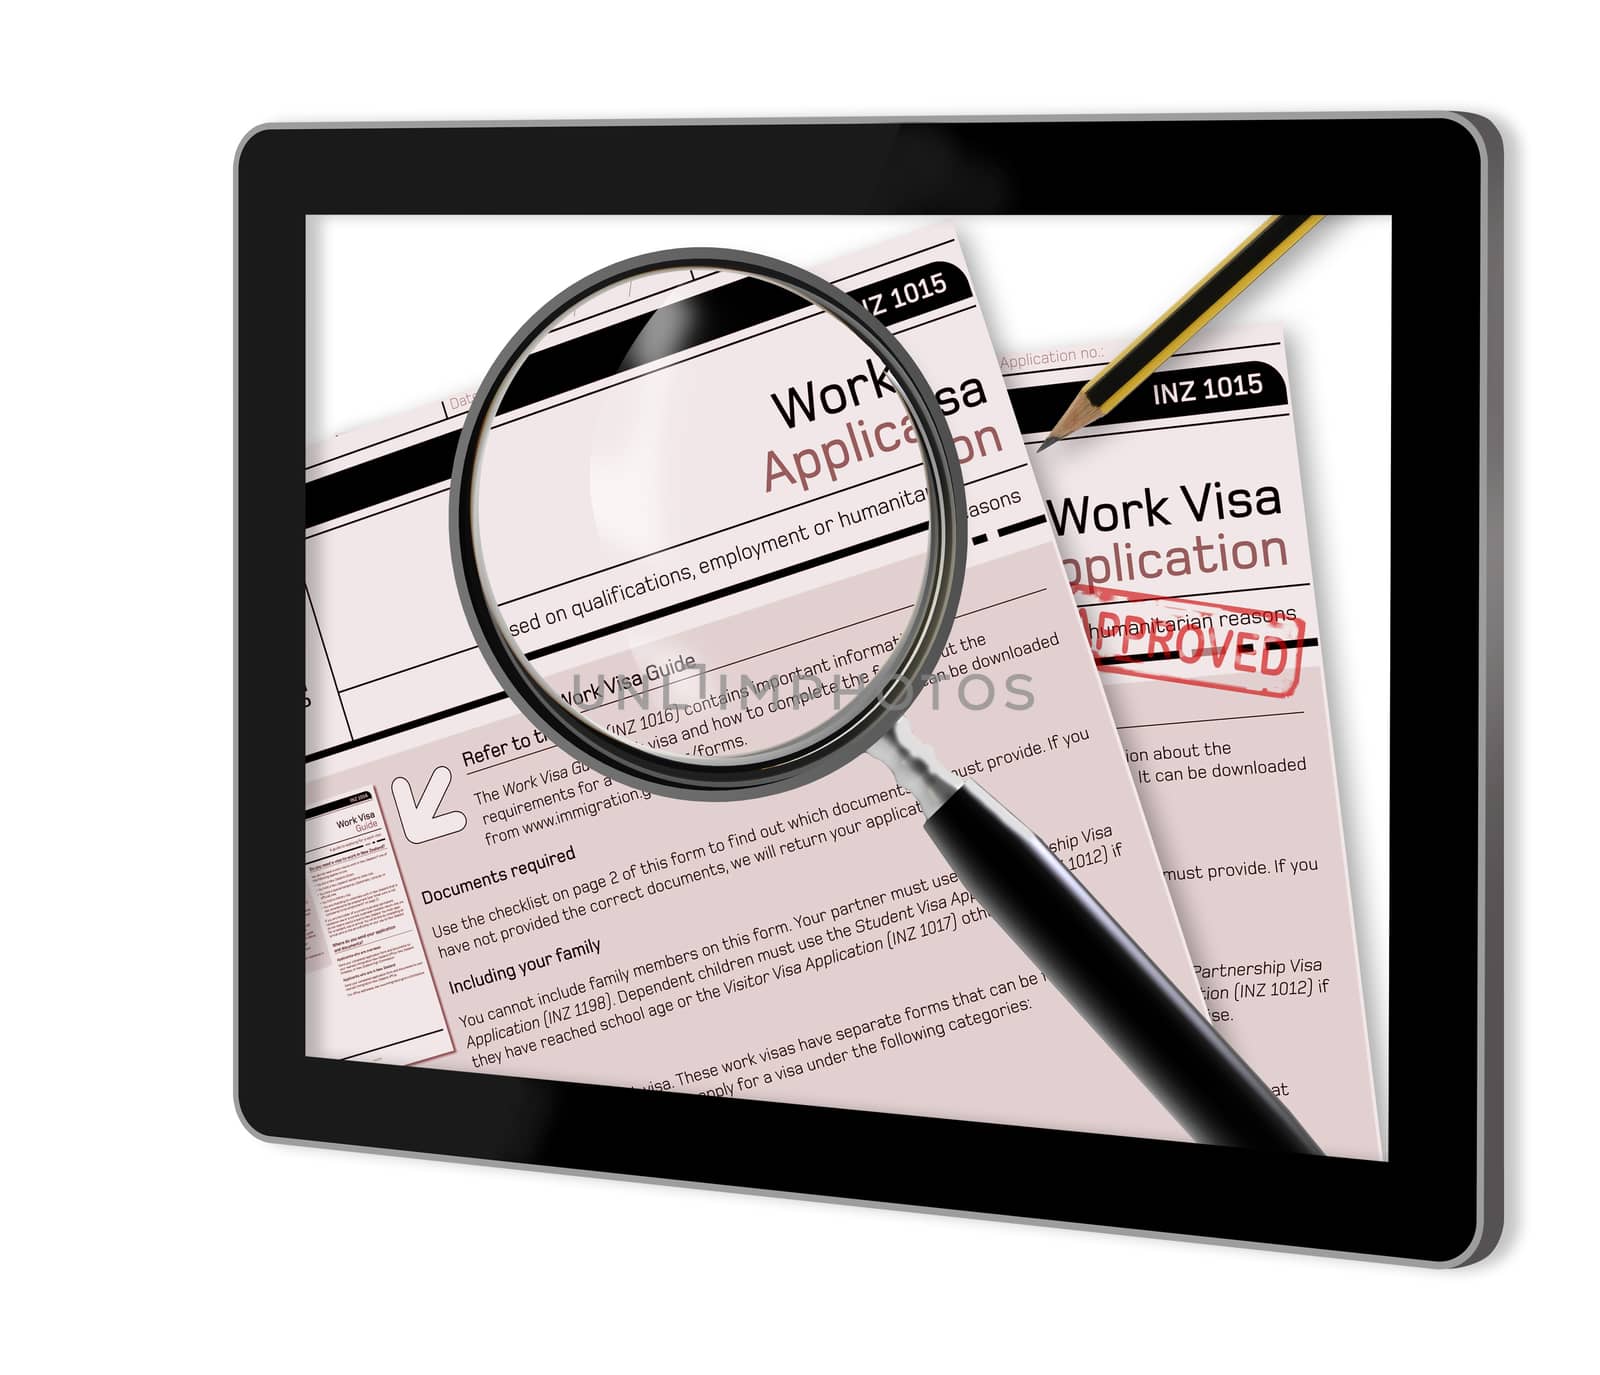 Close-up of work visa application document for temporary stay approved  show  on tablet  made in 2d software isolated on white